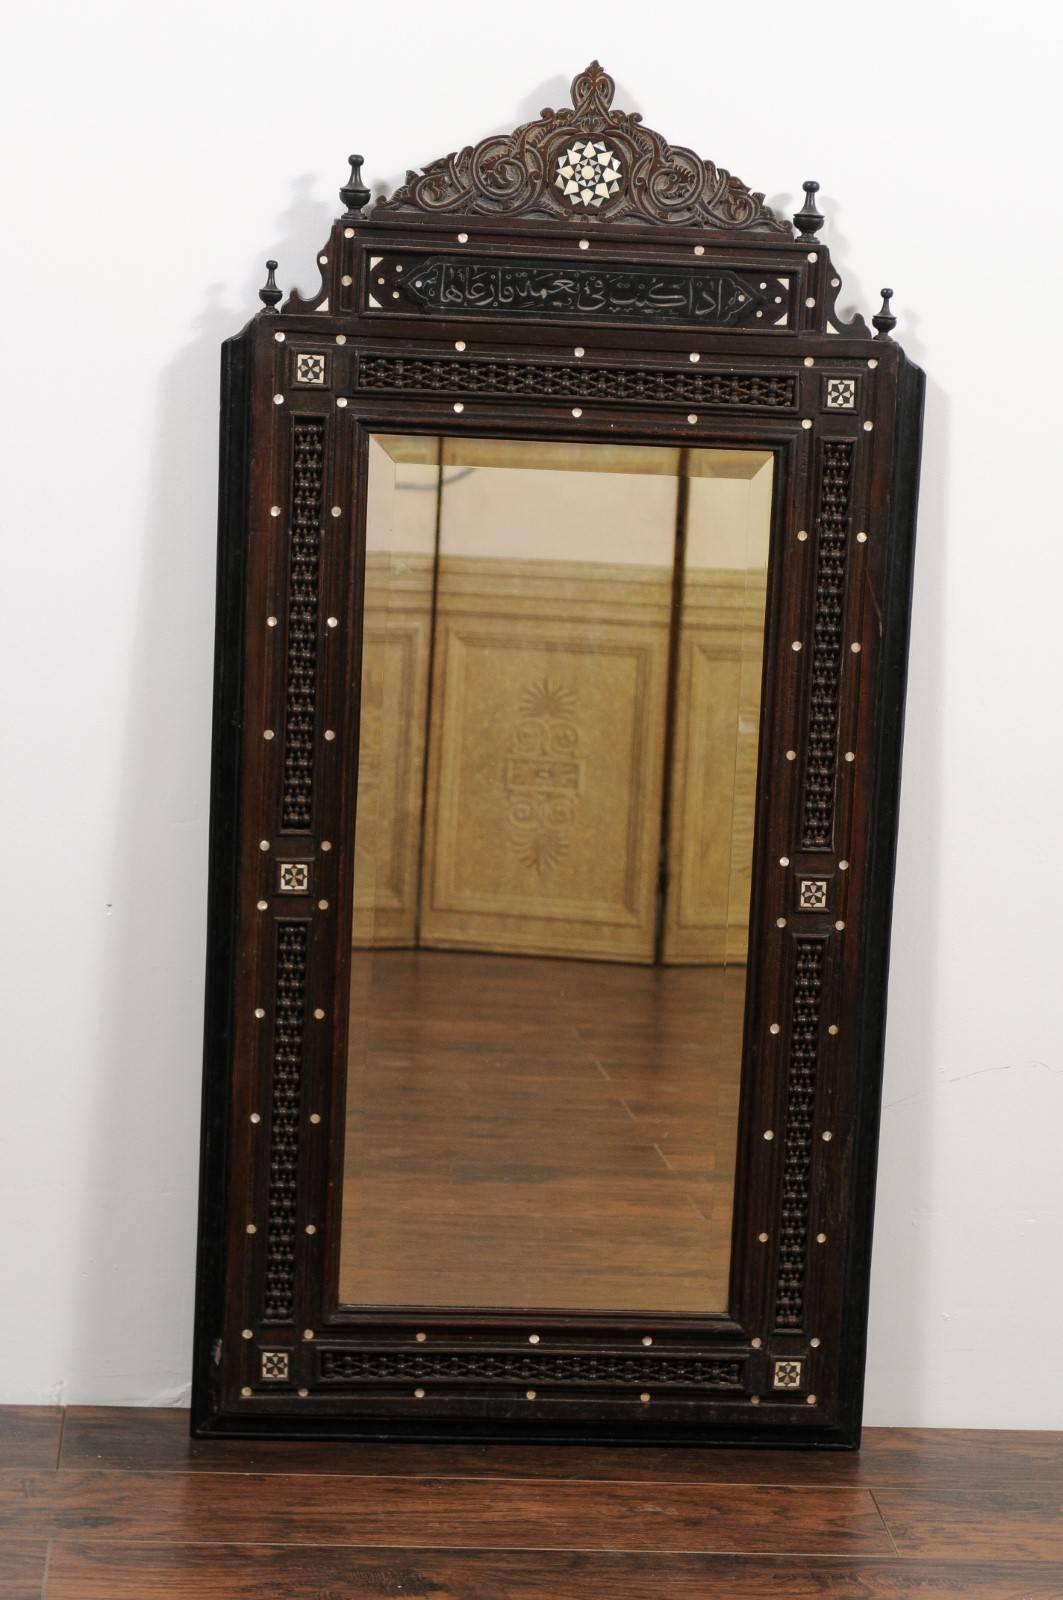 A pair of tall hand-carved Syrian mirrors with mother-of-pearl inlay and ebonized wood accents from the early 20th century. Each of this pair of Syrian mirrors features an exquisite frame. The triangular crest is adorned with a central star-shaped